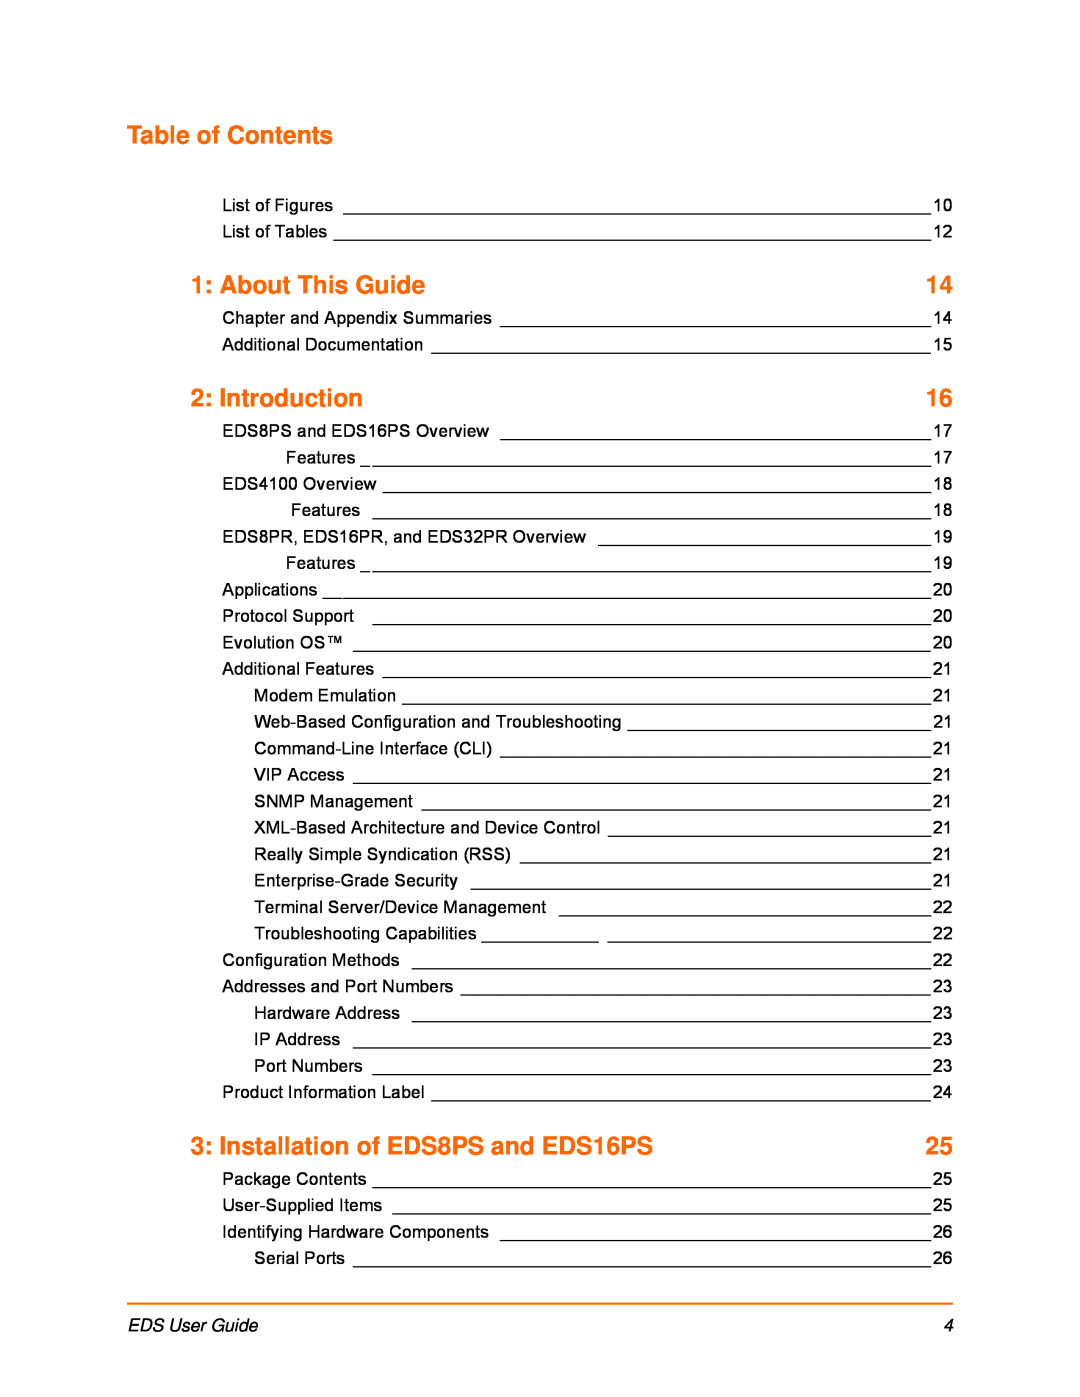 Lantronix EDS8PR Table of Contents, About This Guide, Introduction, Installation of EDS8PS and EDS16PS, EDS User Guide 